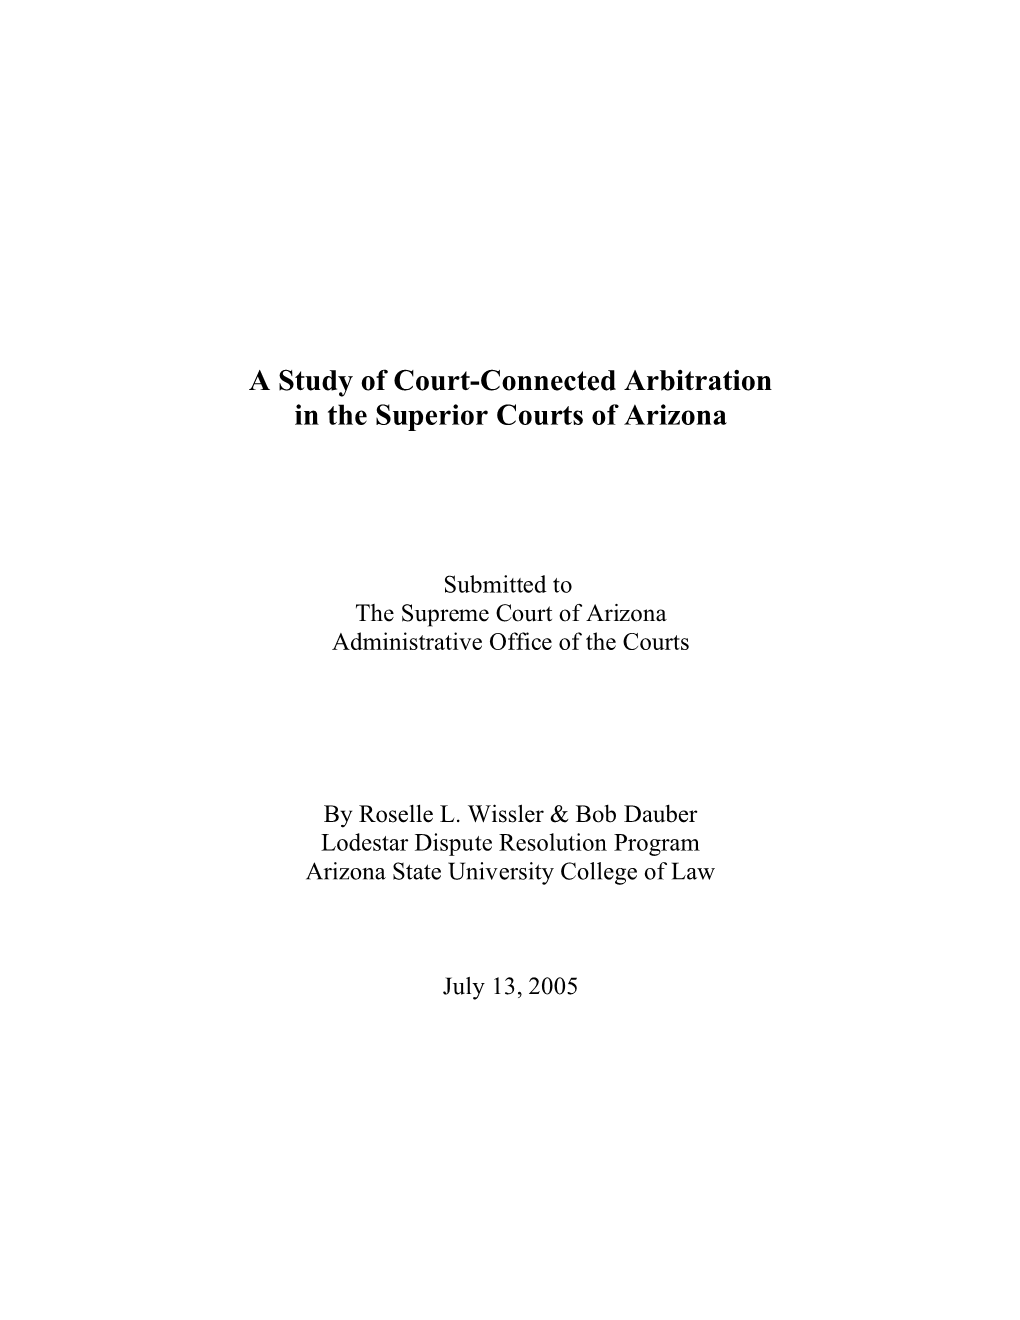 A Study of Court-Connected Arbitration in the Superior Courts of Arizona